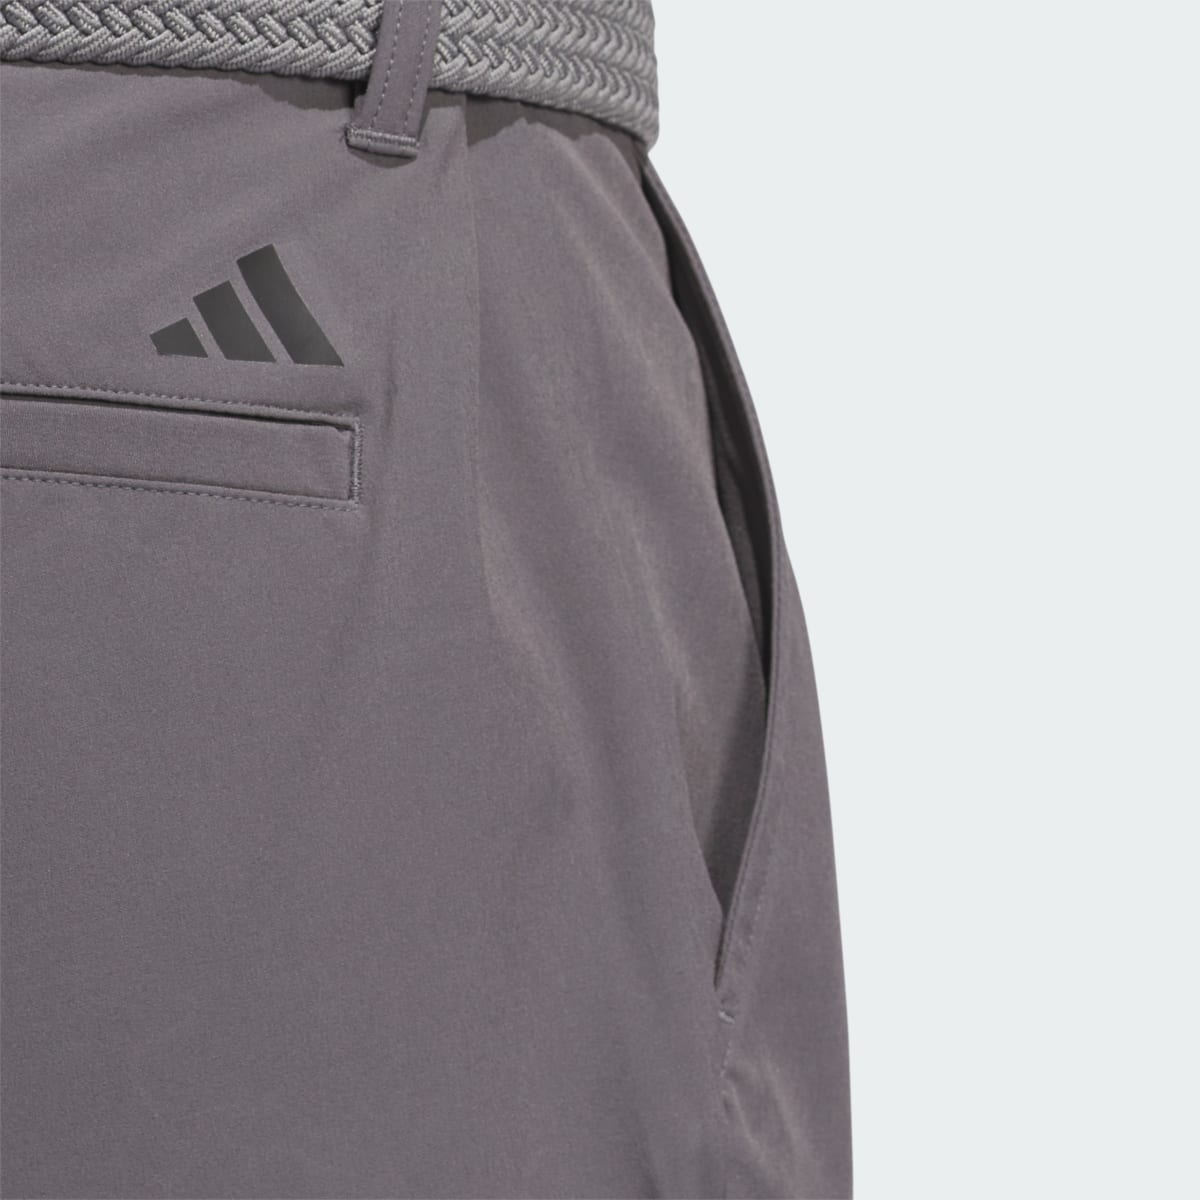 Adidas Ultimate365 Tapered Golf Trousers. 7